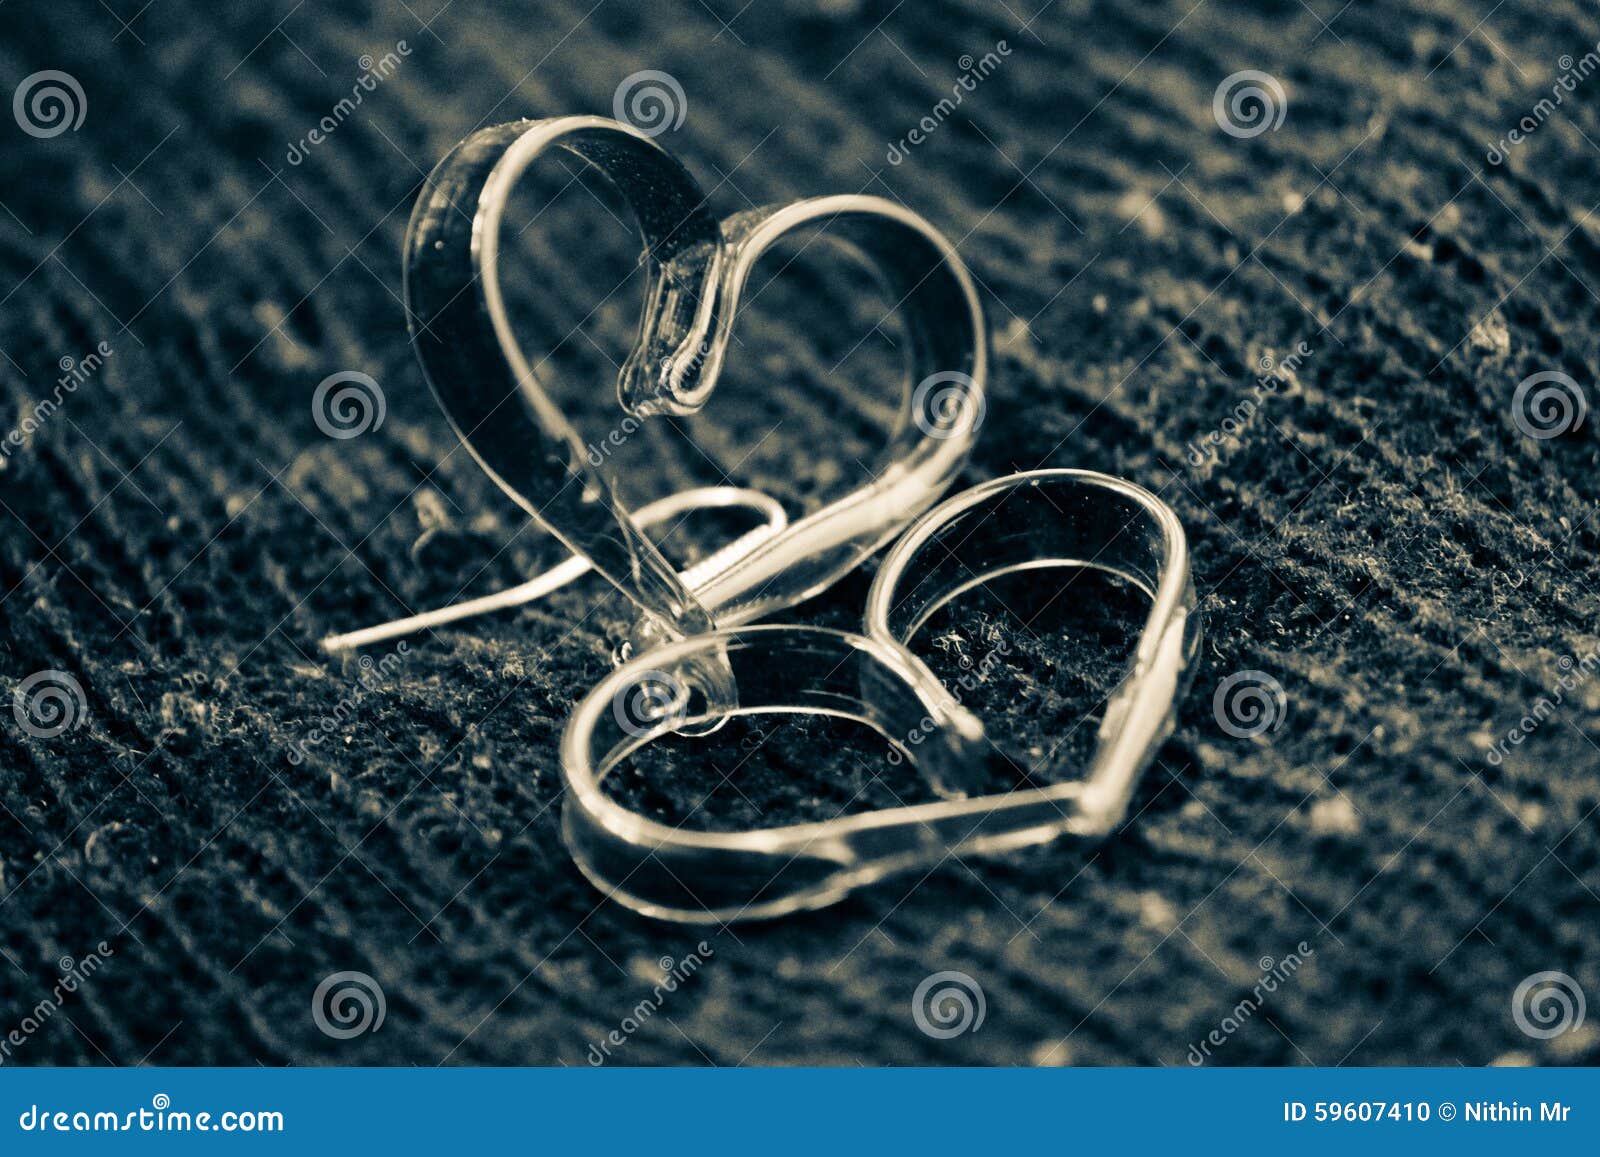 Black And White Glossy Love Heart Stock Photo Image Of